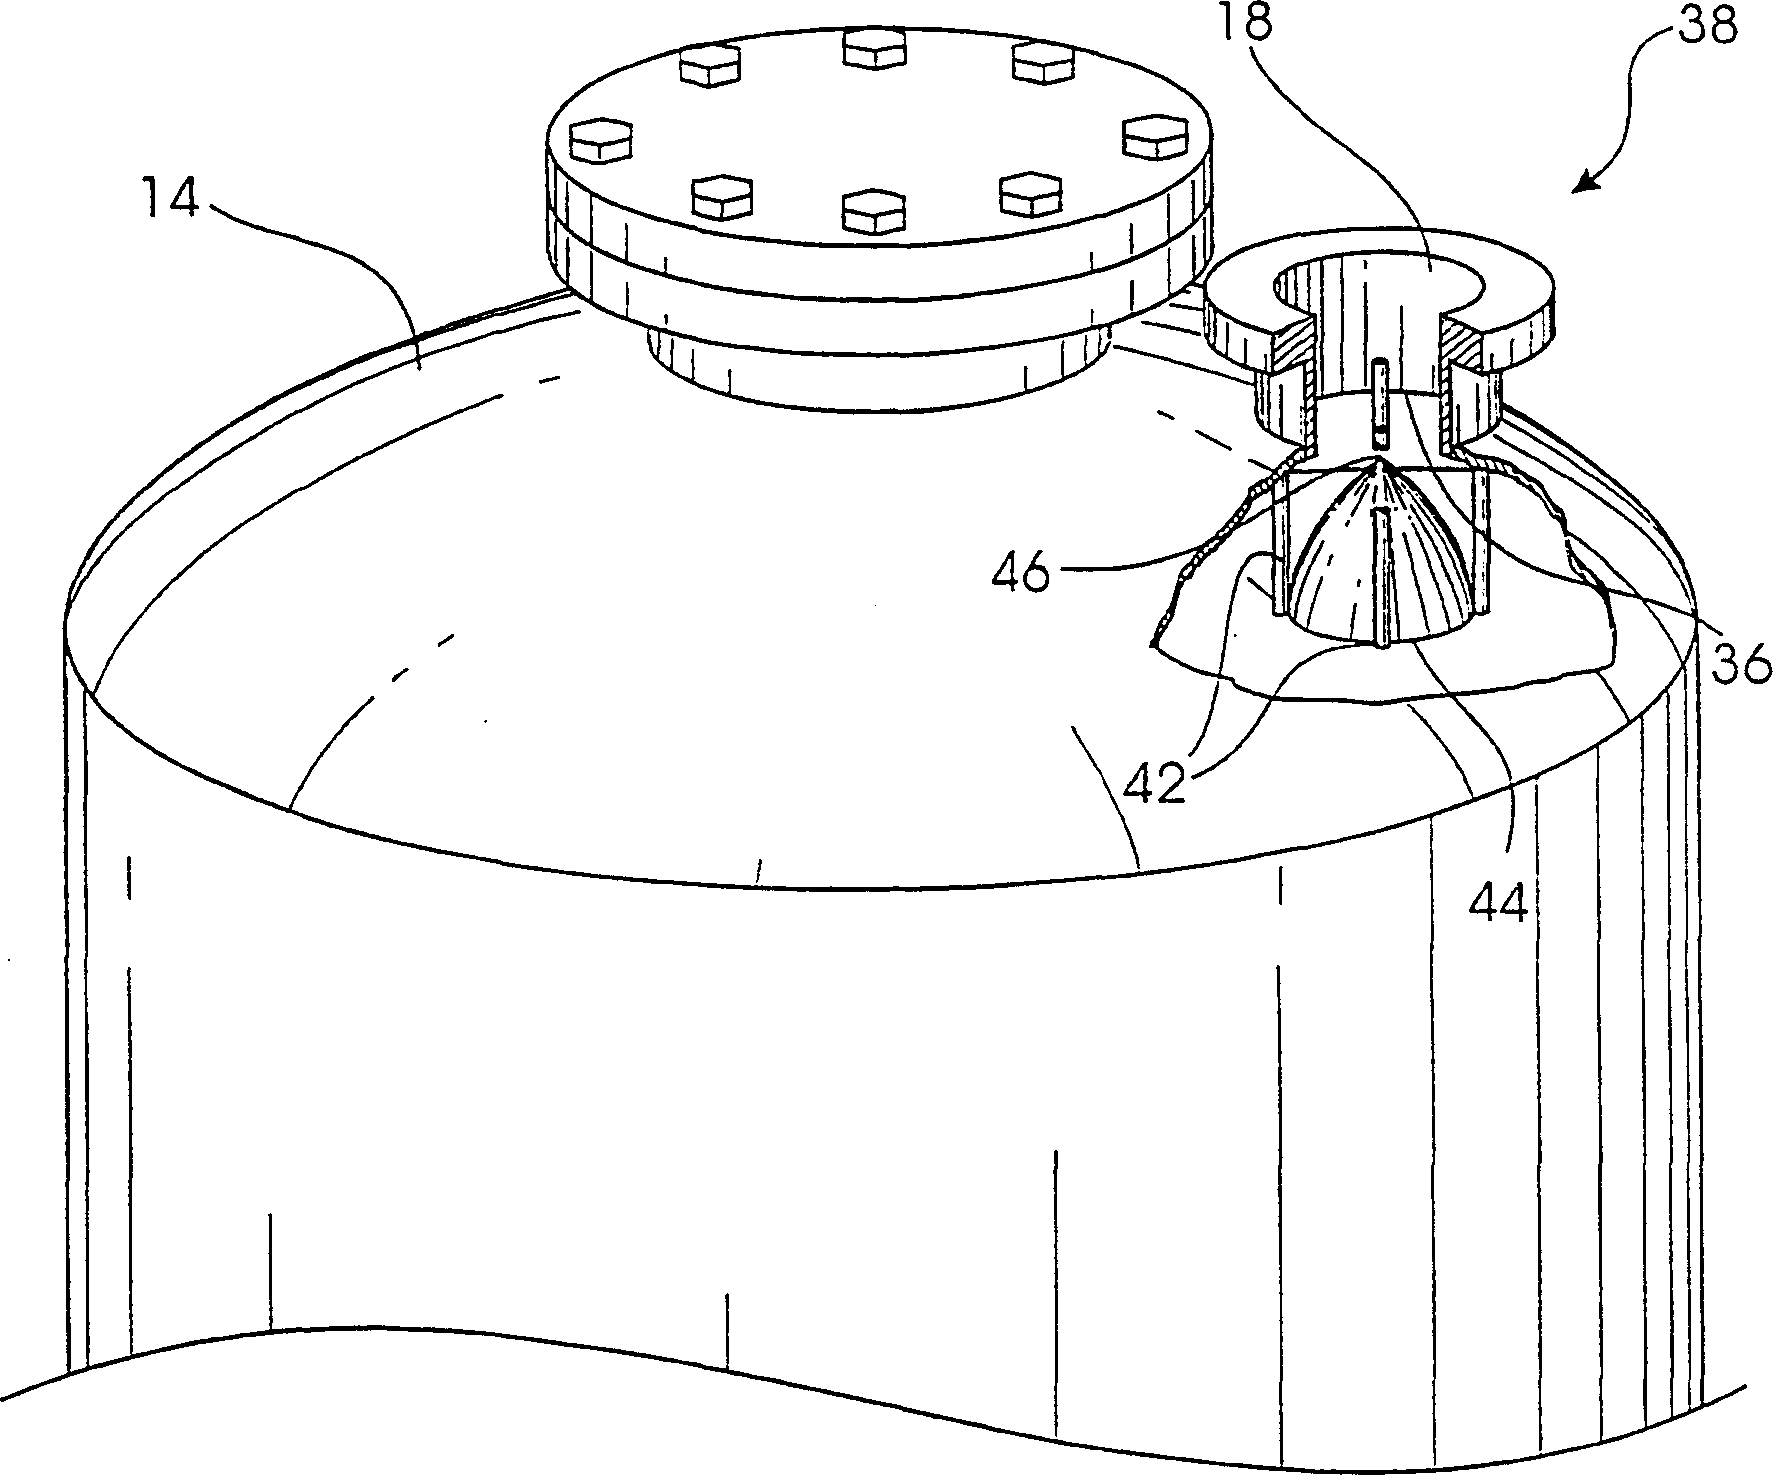 Coke drun with overhead deflector plate and method using this